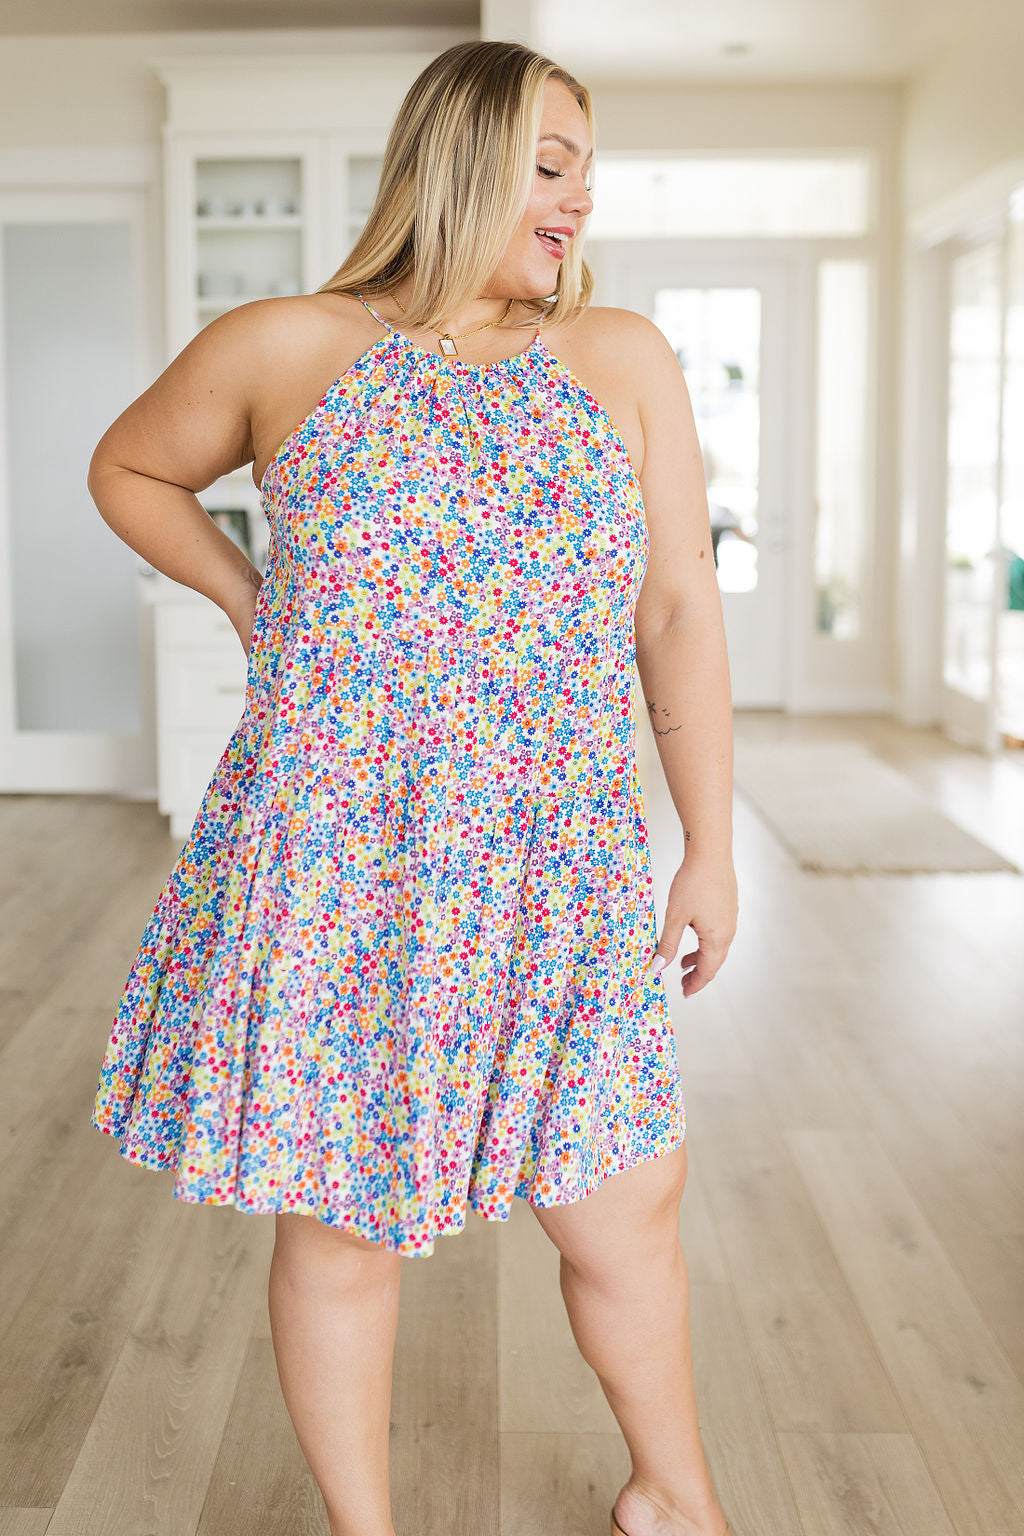 Afternoon Sun Floral Dress - WEBSITE EXCLUSIVE